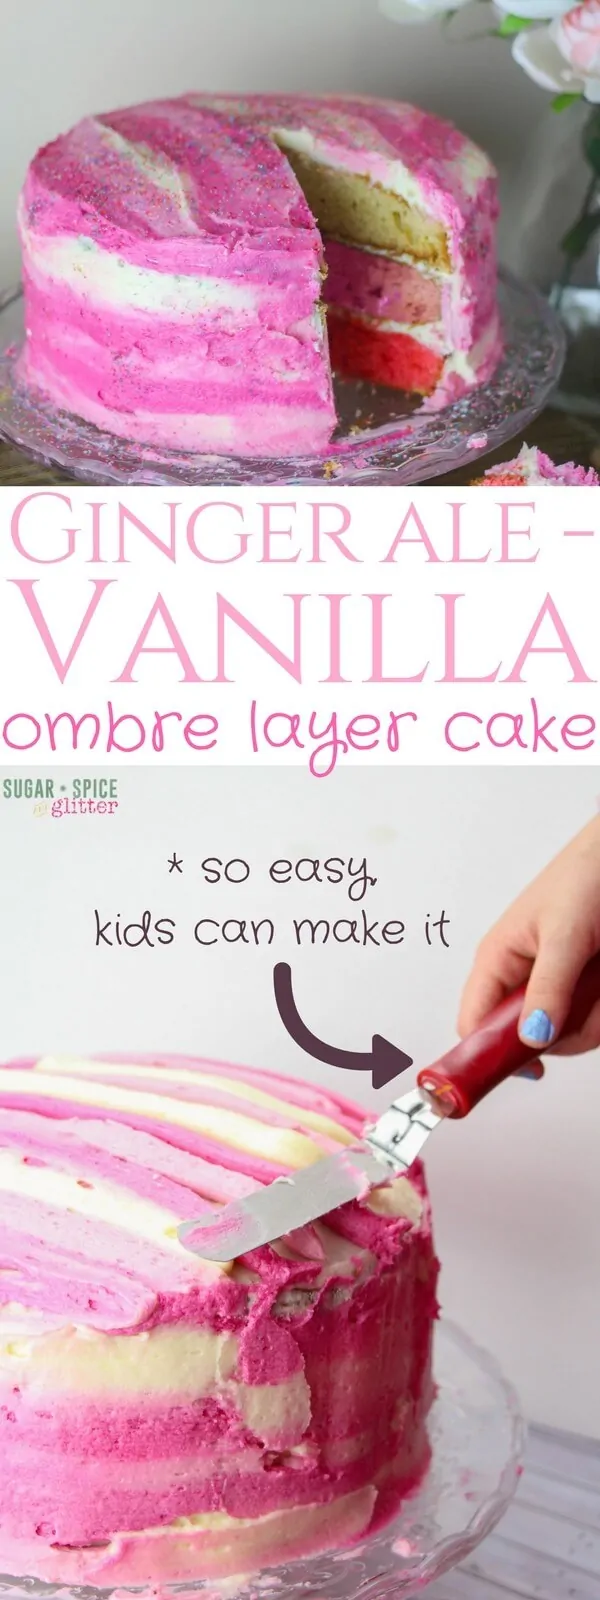 This GINGER ALE VANILLA cake tastes AMAZING and looks gorgeous at any occasion - and would you believe that it's so easy, your kids can help with every step? Underneath that cute, watercolor-effect ginger ale vanilla buttercream is an unexpected pink ombre layer cake that tastes like a mix of ginger ale and cream soda